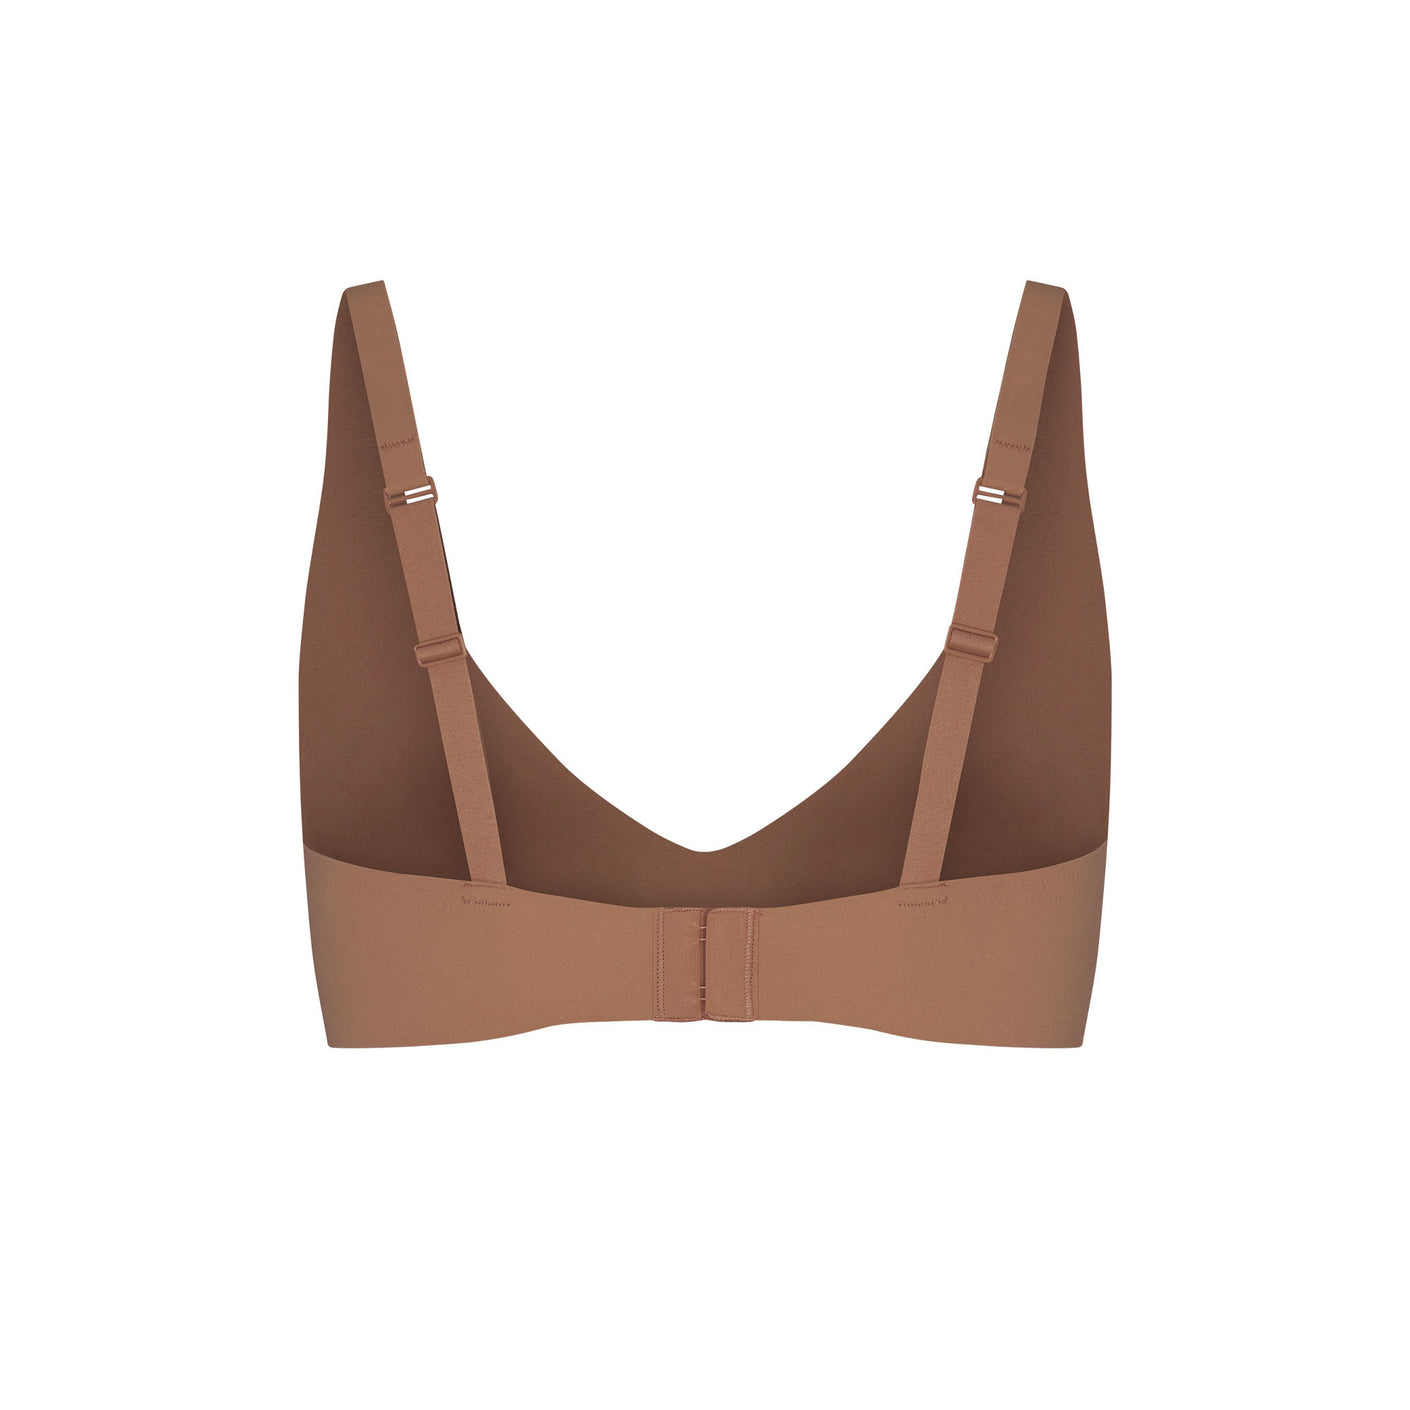 SKIMS NWT Cotton Plunge Bralette Soot - Size 2X - $23 New With Tags - From  Ashley